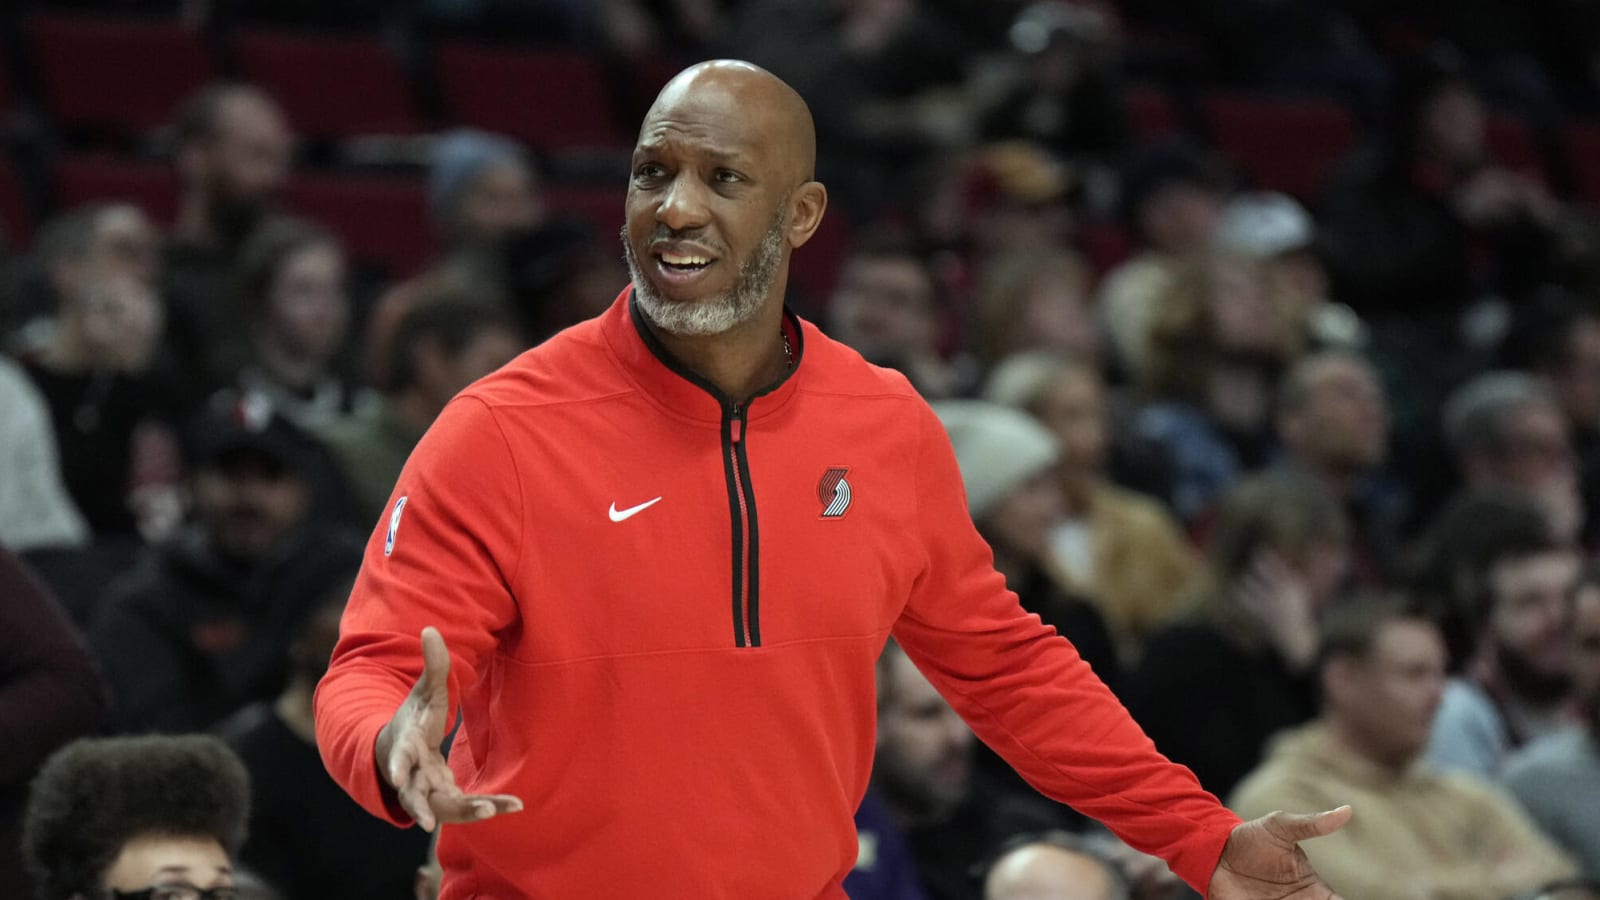 Watch: ‘Furious’ Chauncey Billups loses his mind on the referee’s decision of not granting Trail Blazers a timeout in dying seconds during game against the Thunder